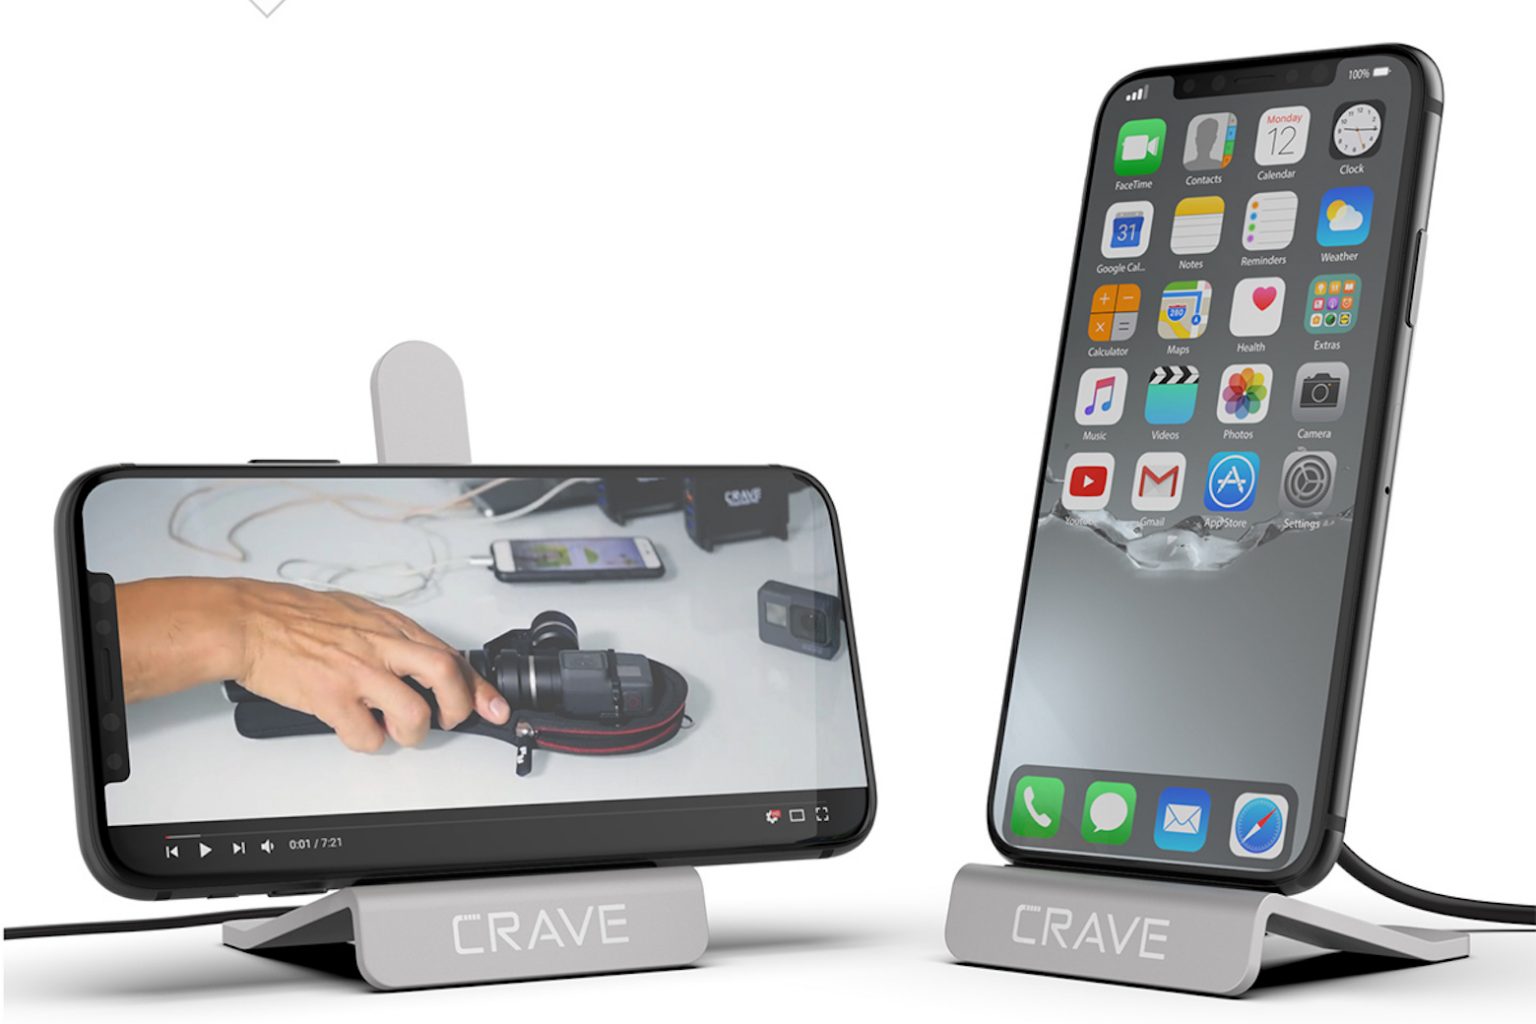 Deck out your iPhone with these 4 charging deals by Crave